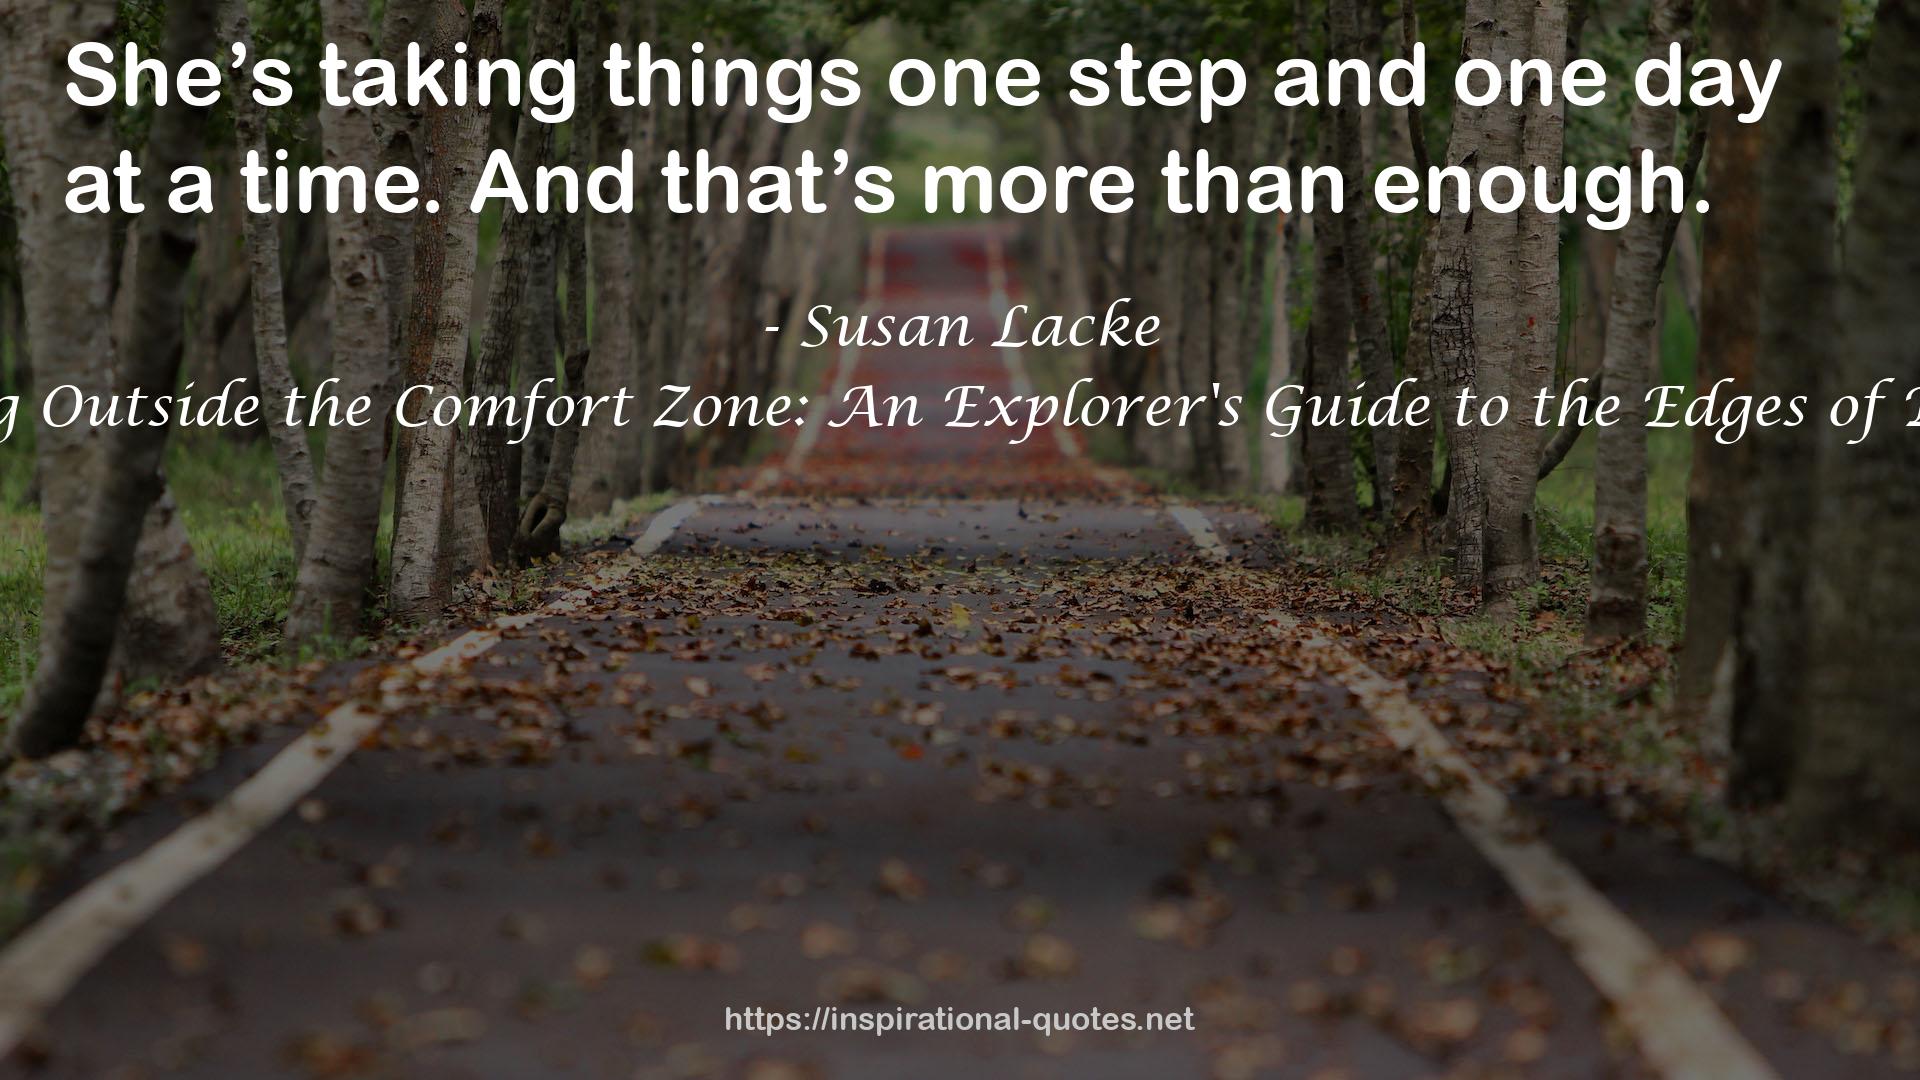 Running Outside the Comfort Zone: An Explorer's Guide to the Edges of Running QUOTES